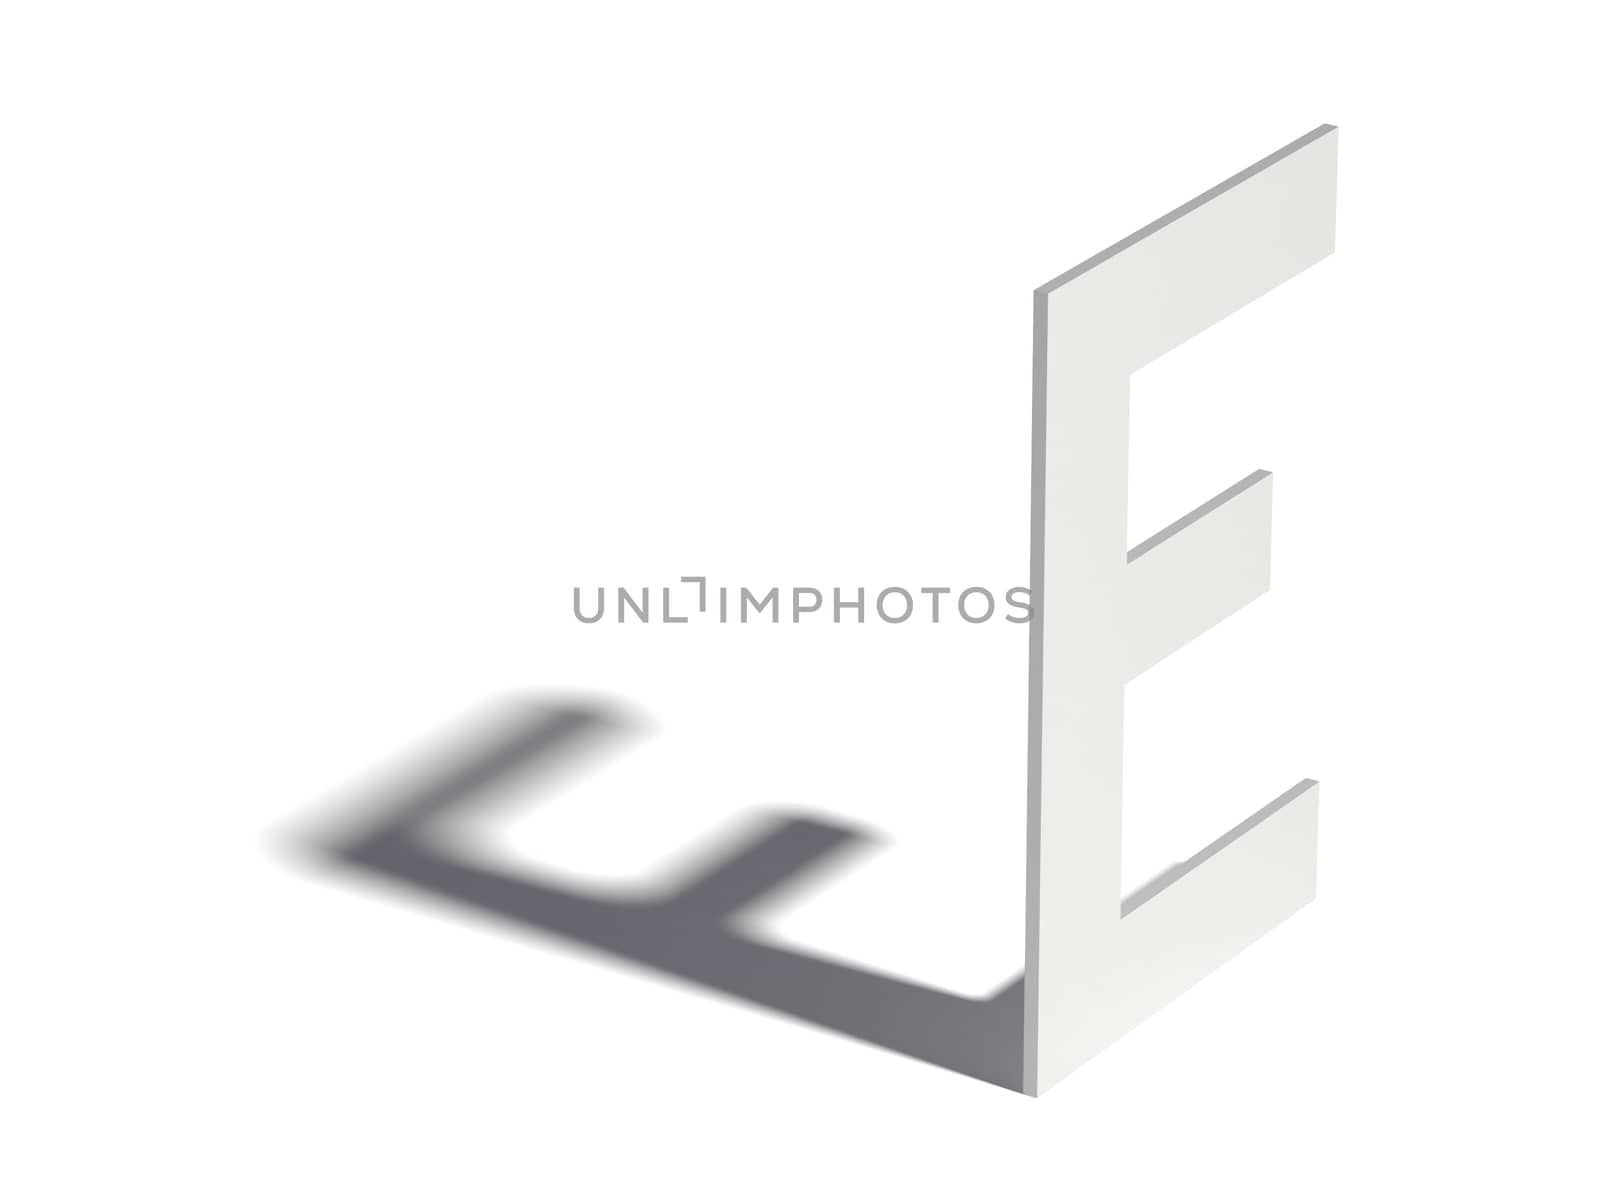 Drop shadow font. Letter E. 3D render illustration isolated on white background